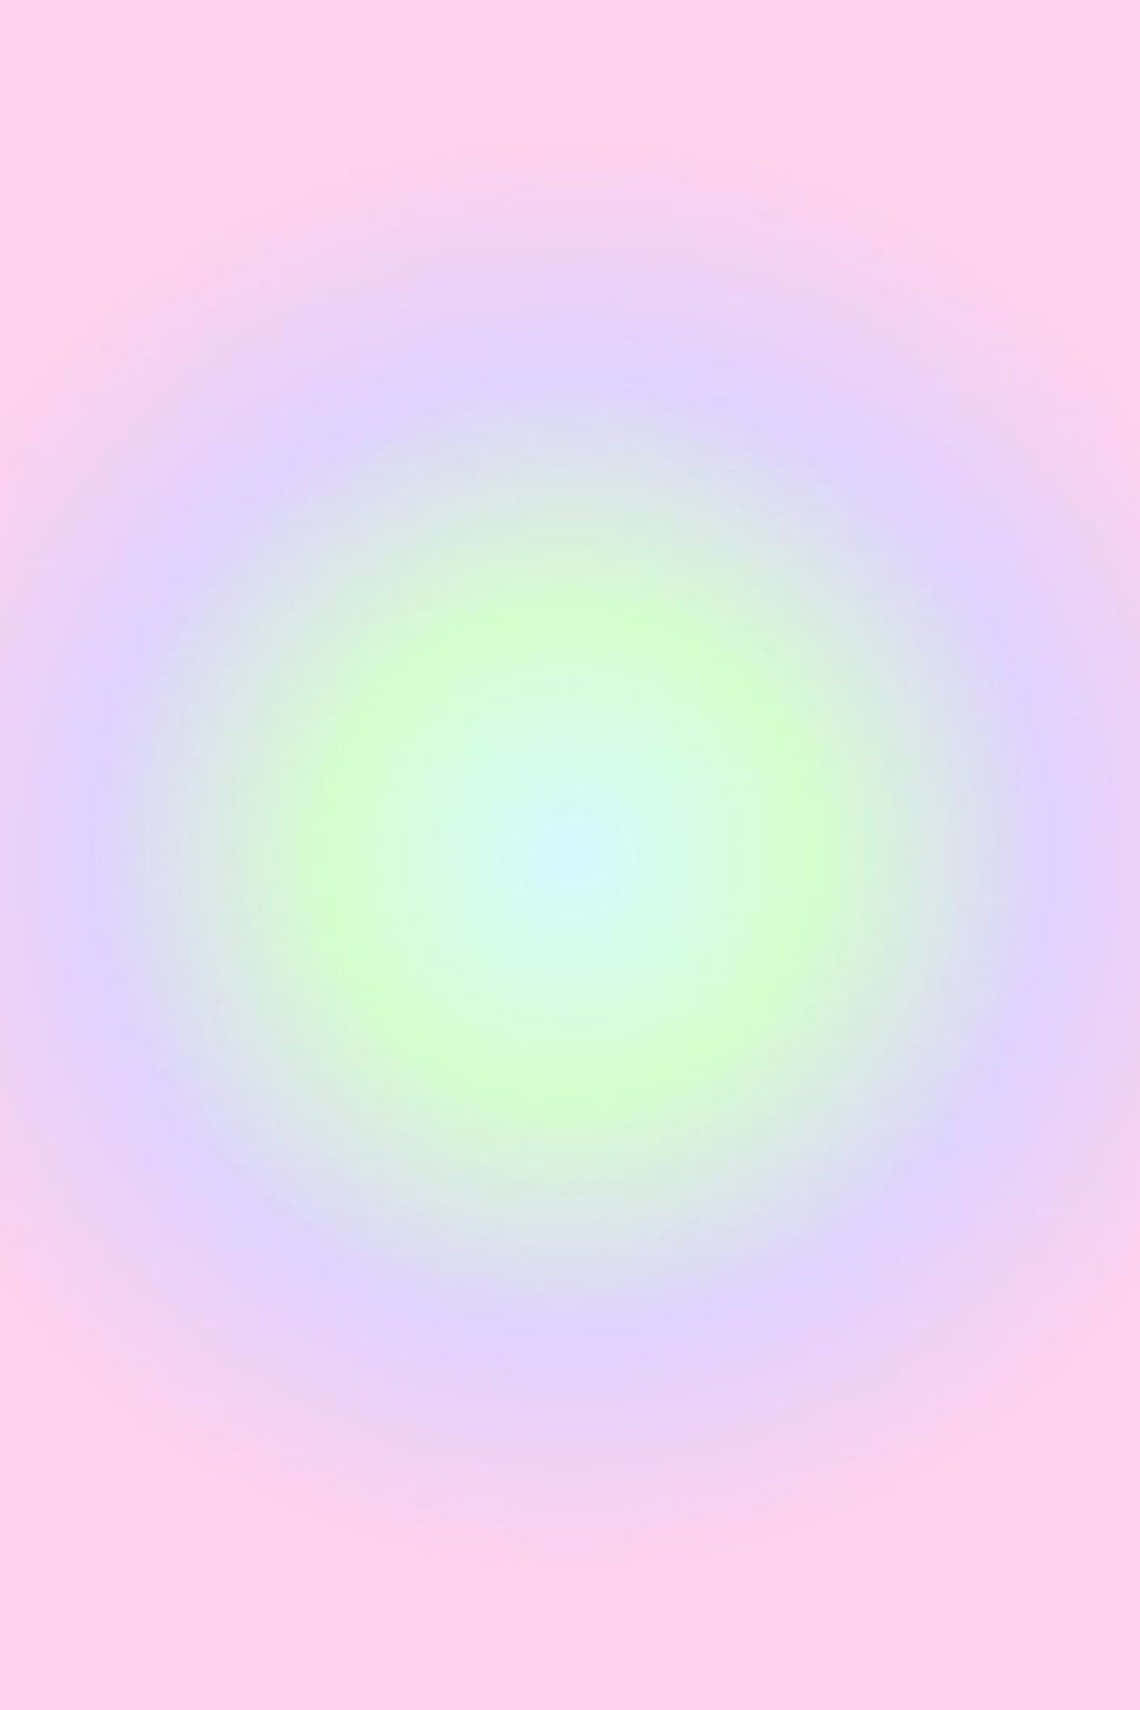 A Pink And Green Background With A Circular Shape